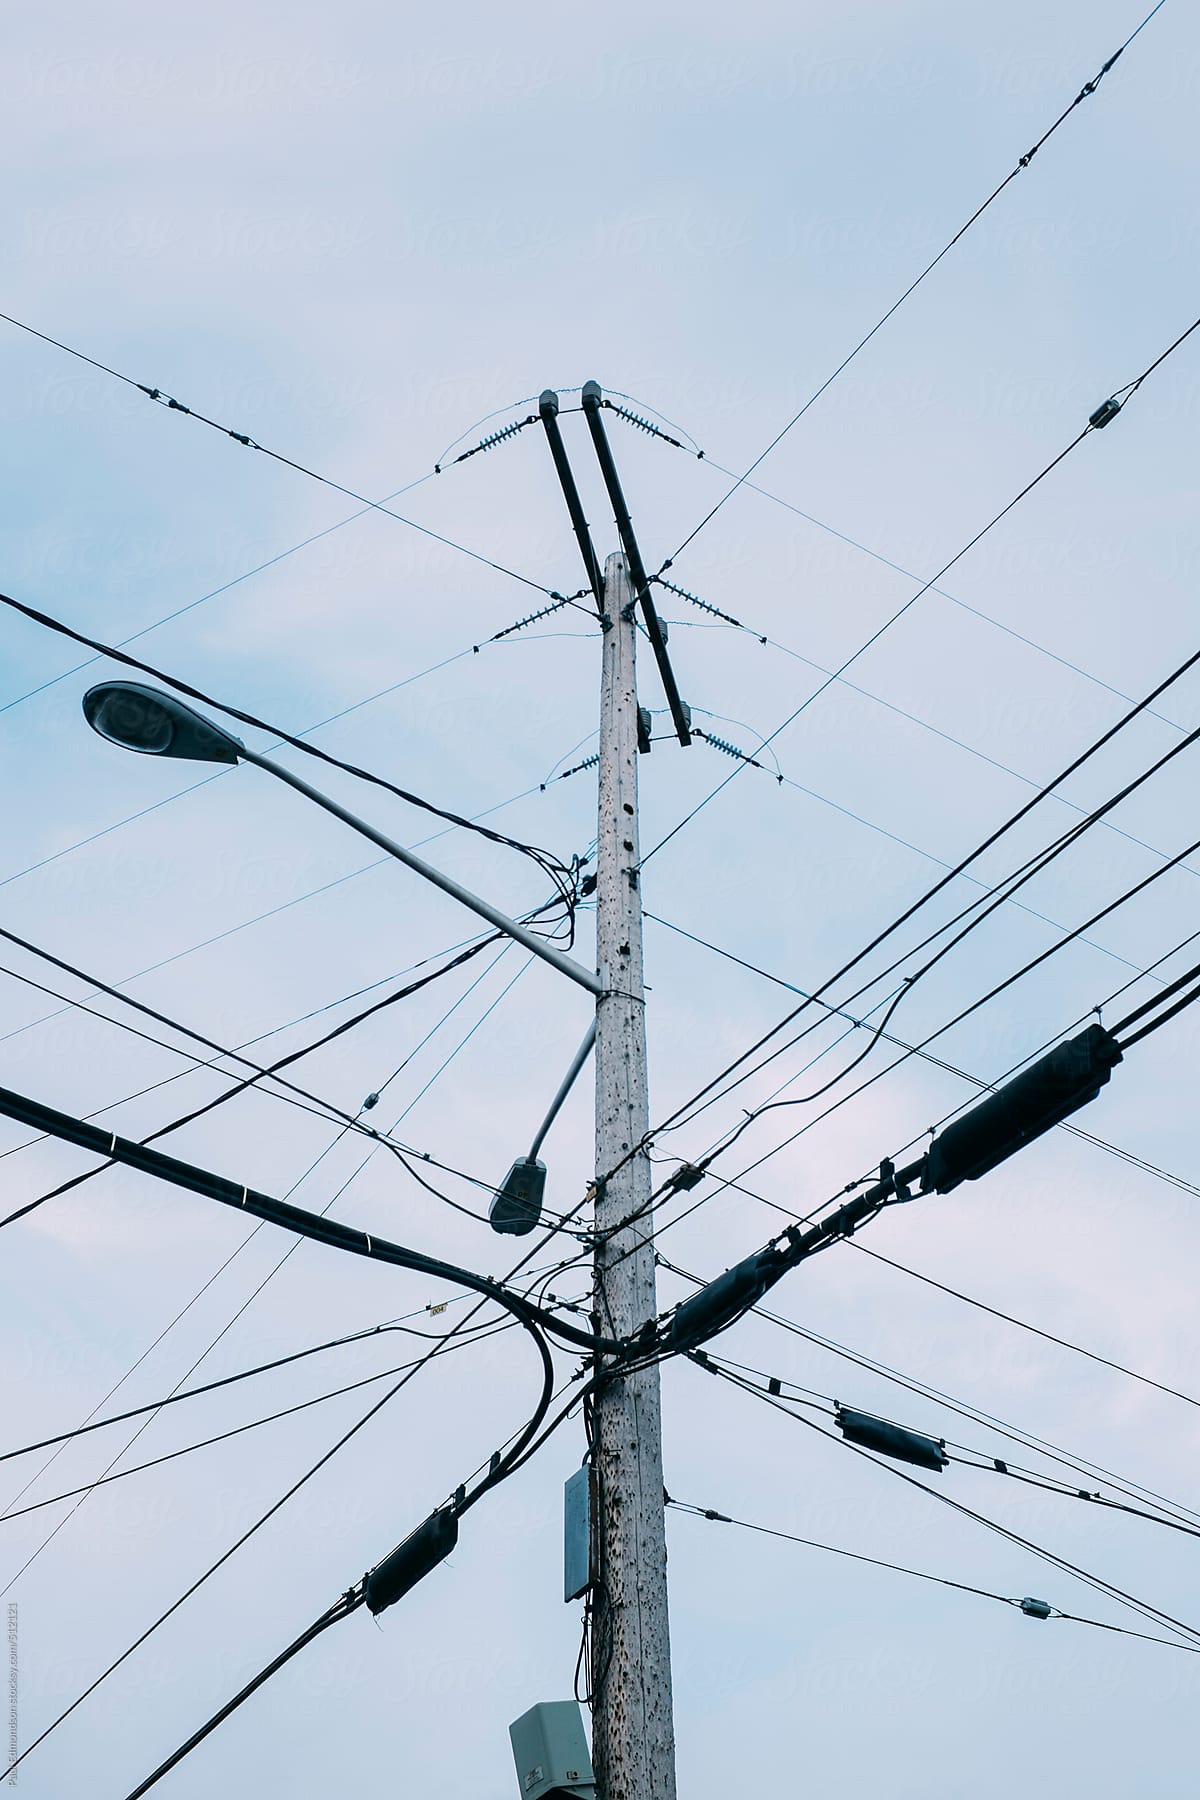 Telephone pole, street light and electrical wires